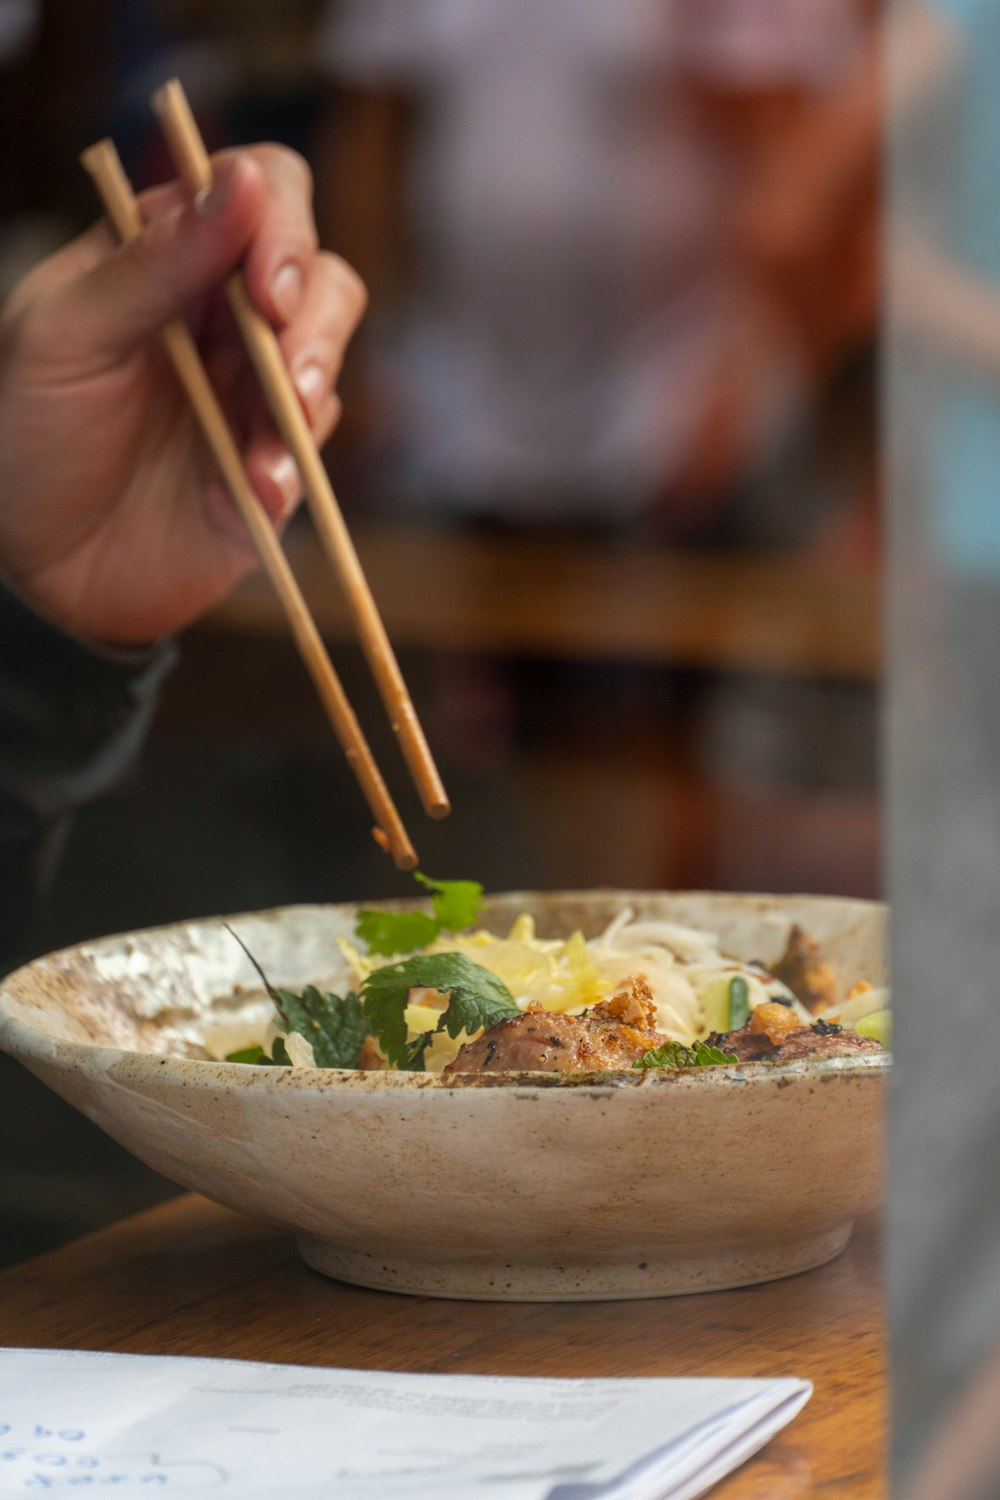 a person holding chopsticks over a bowl of food